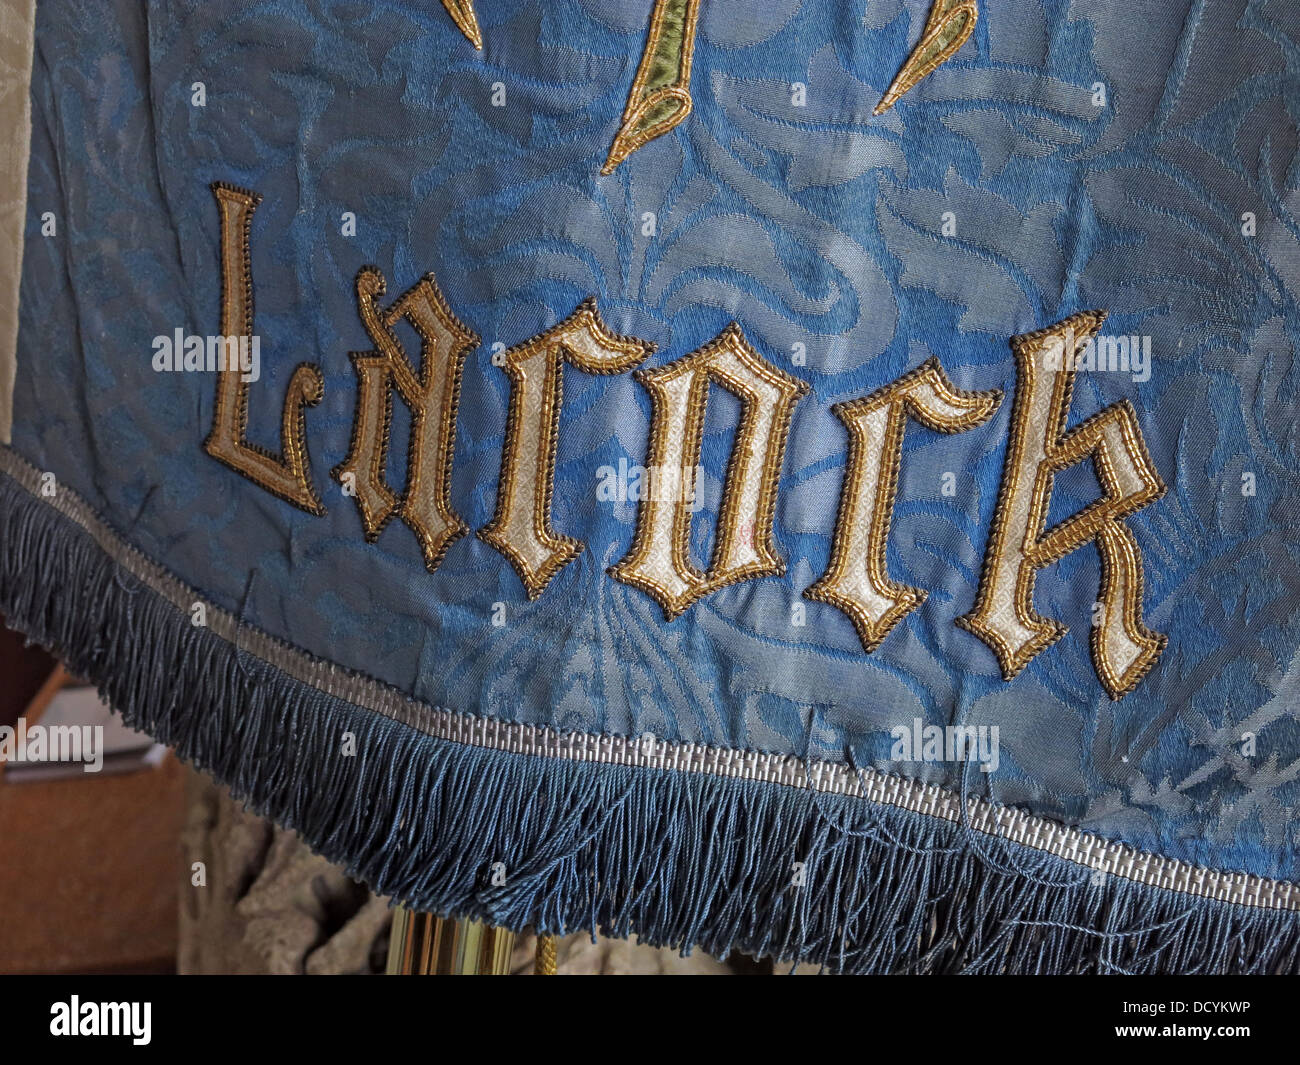 Lacock Abbey banner,Lacock,Wiltshire, England, SN15 Stock Photo